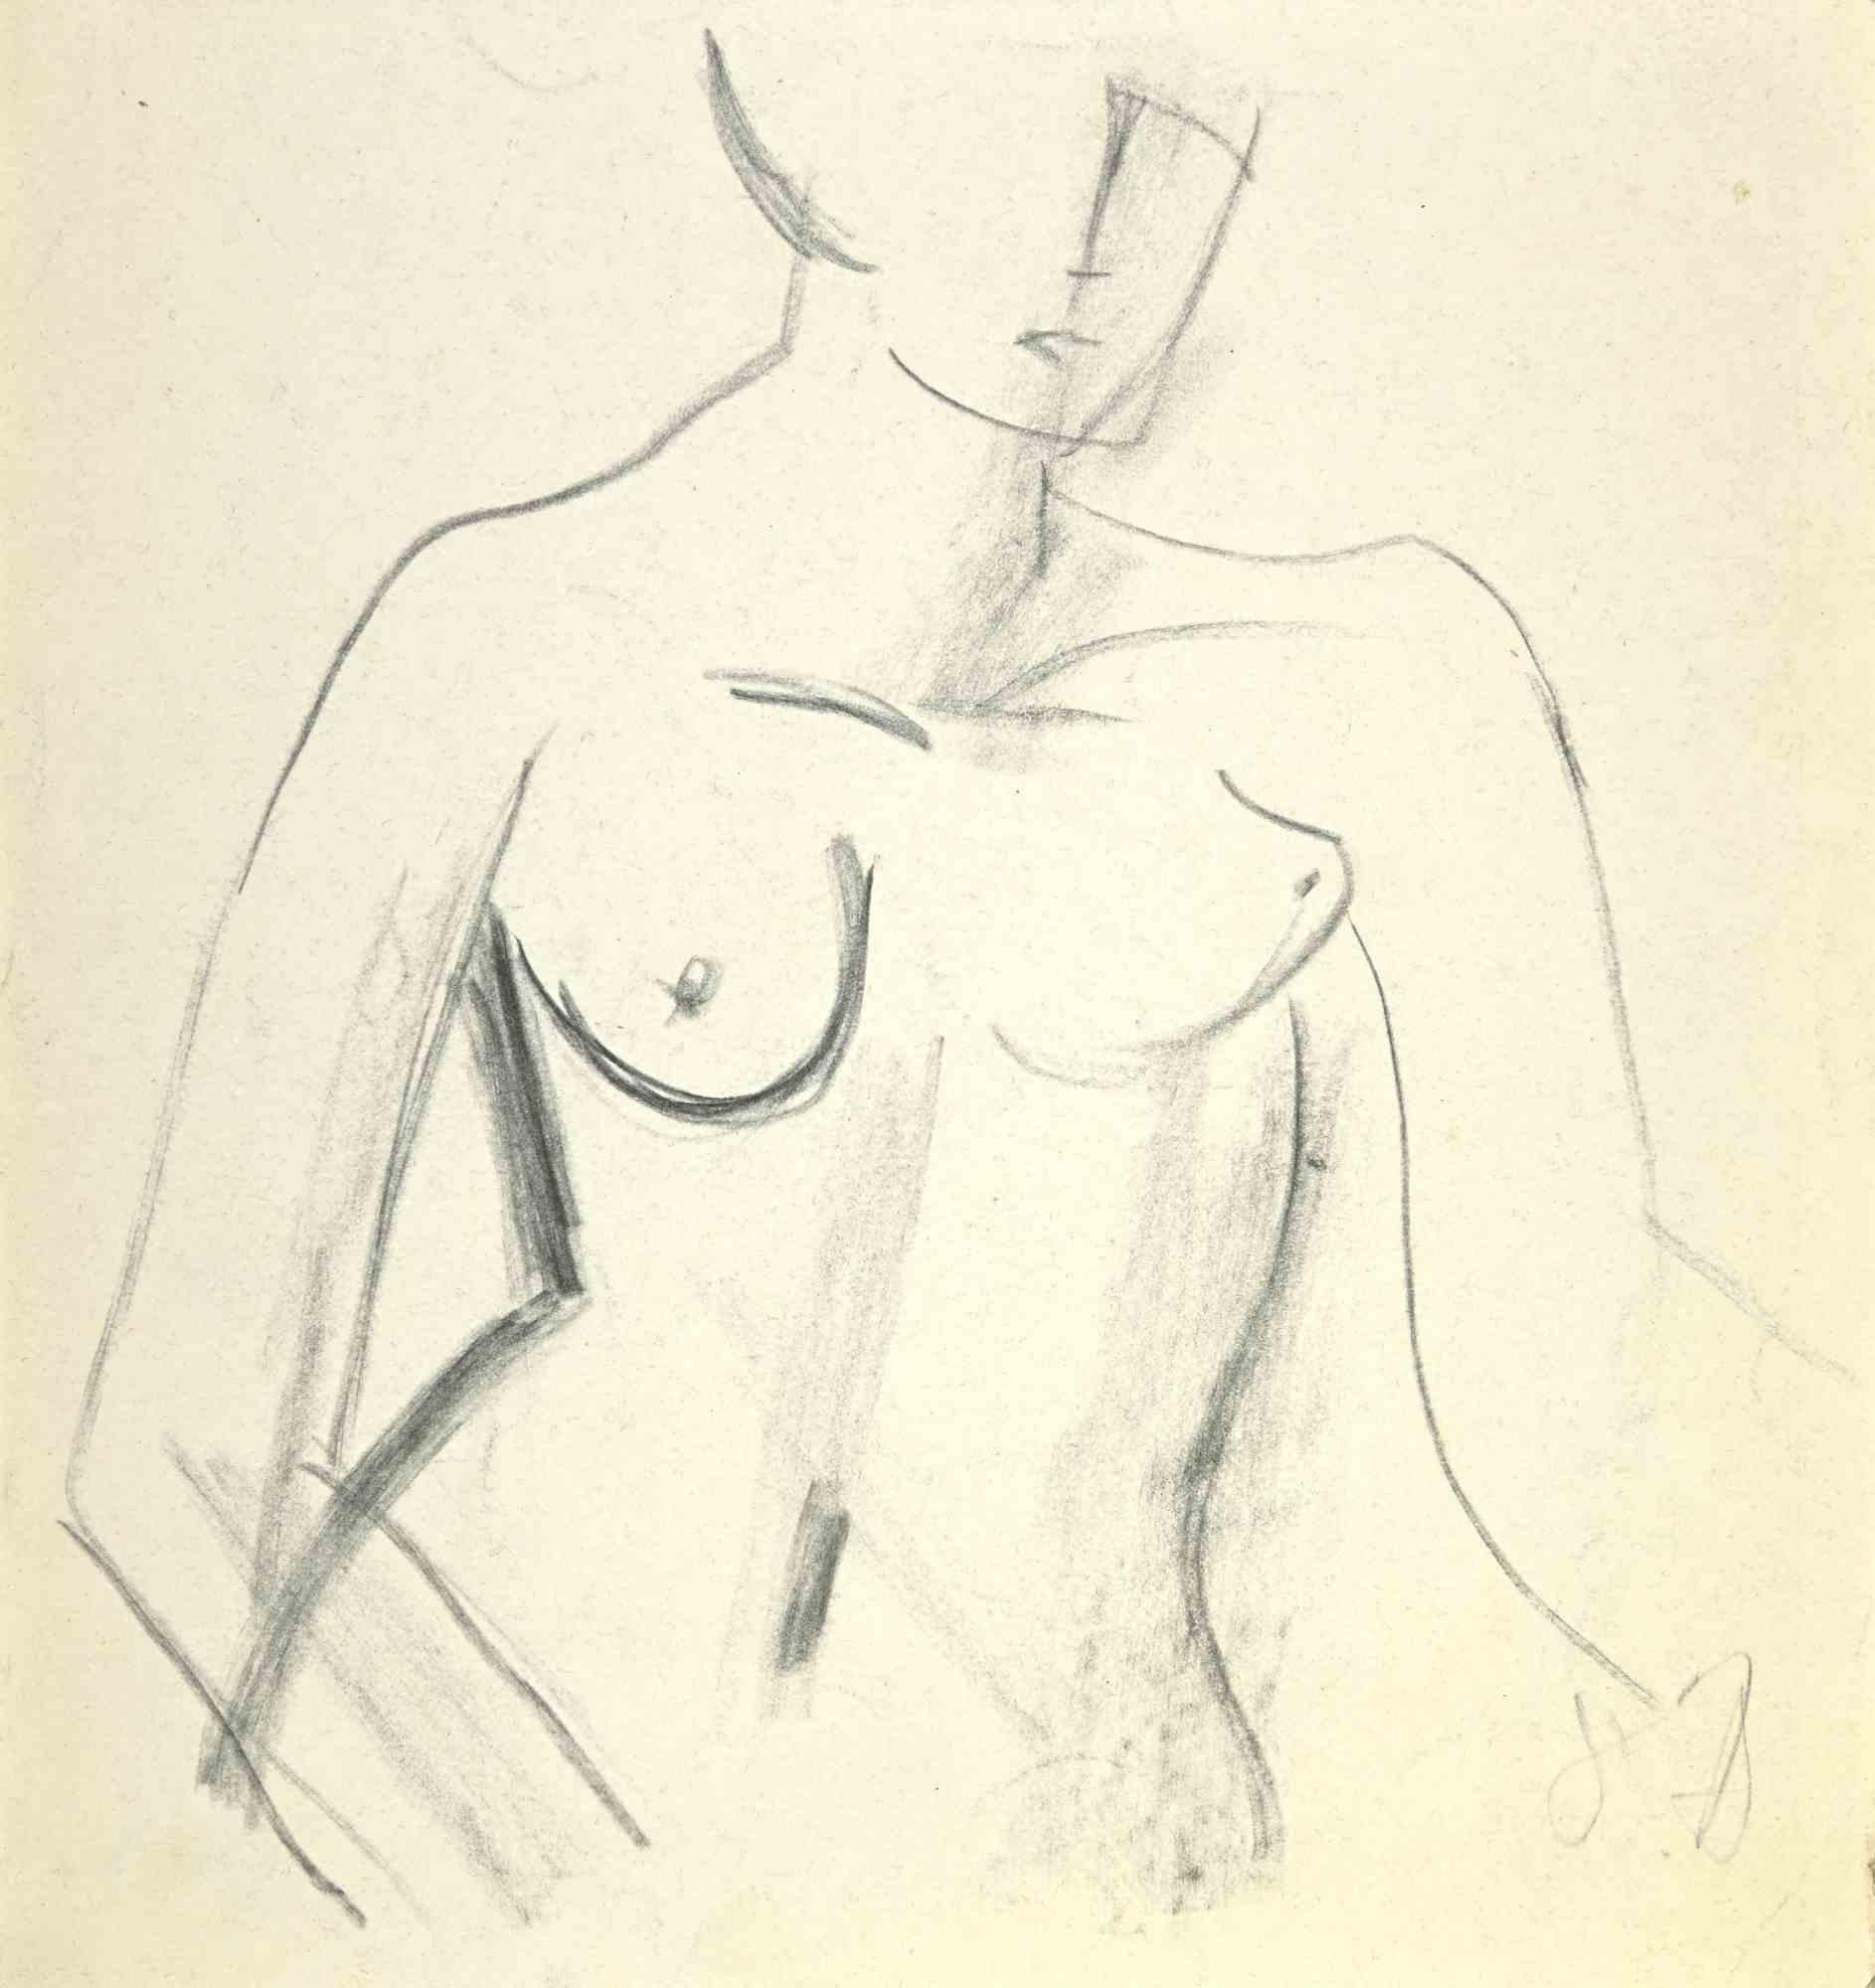 The Nude - Drawing by L. B. Saint-André - Mid 20th Century - Art by Louis Berthomme Saint-Andre